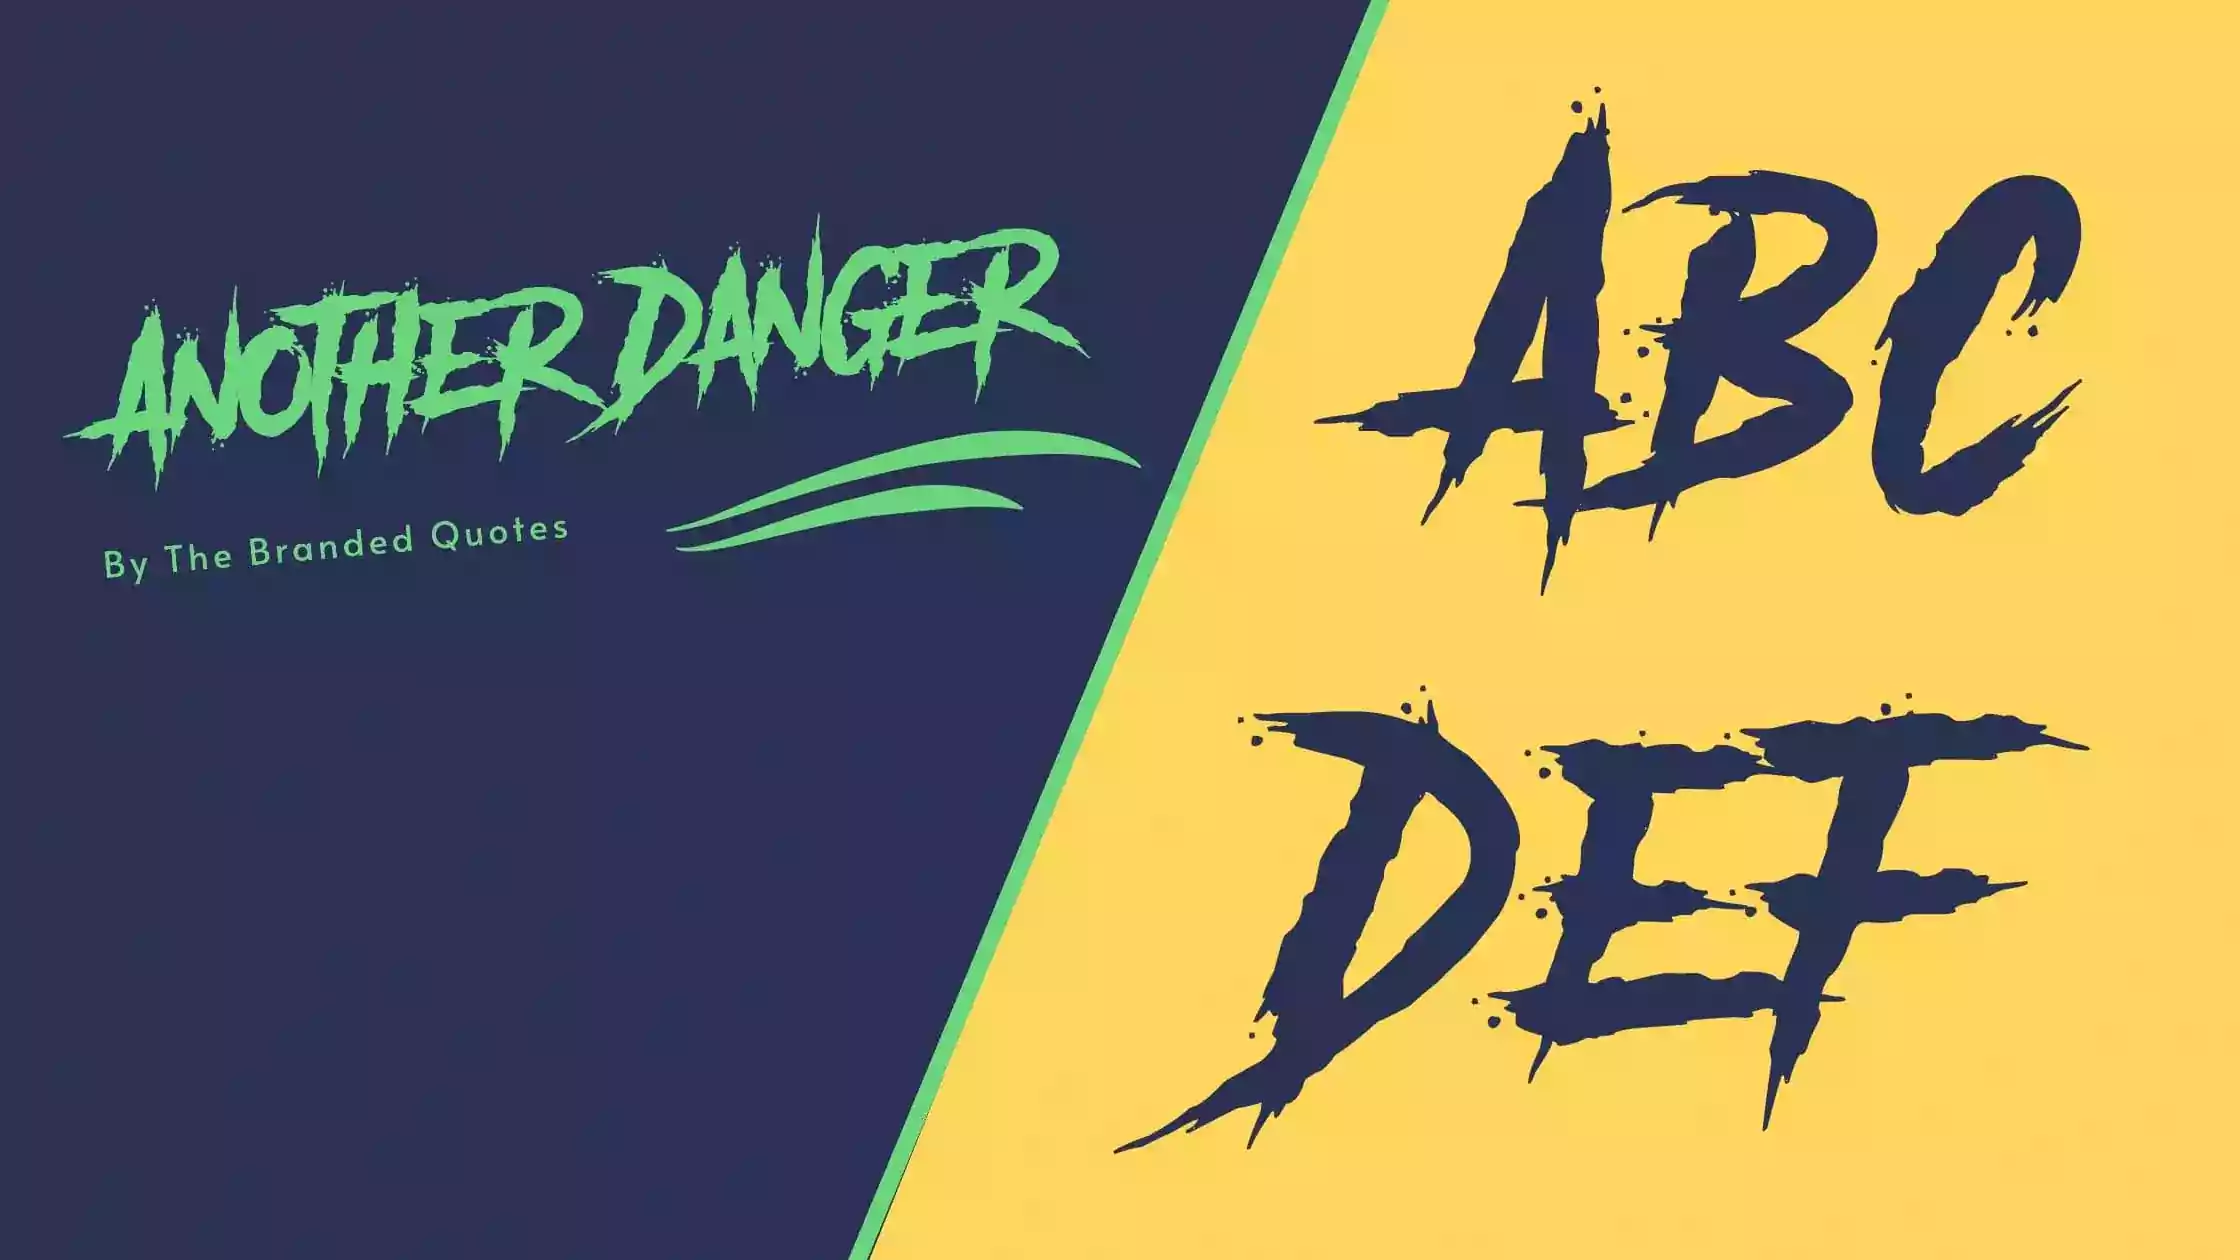 Another Danger Font Download